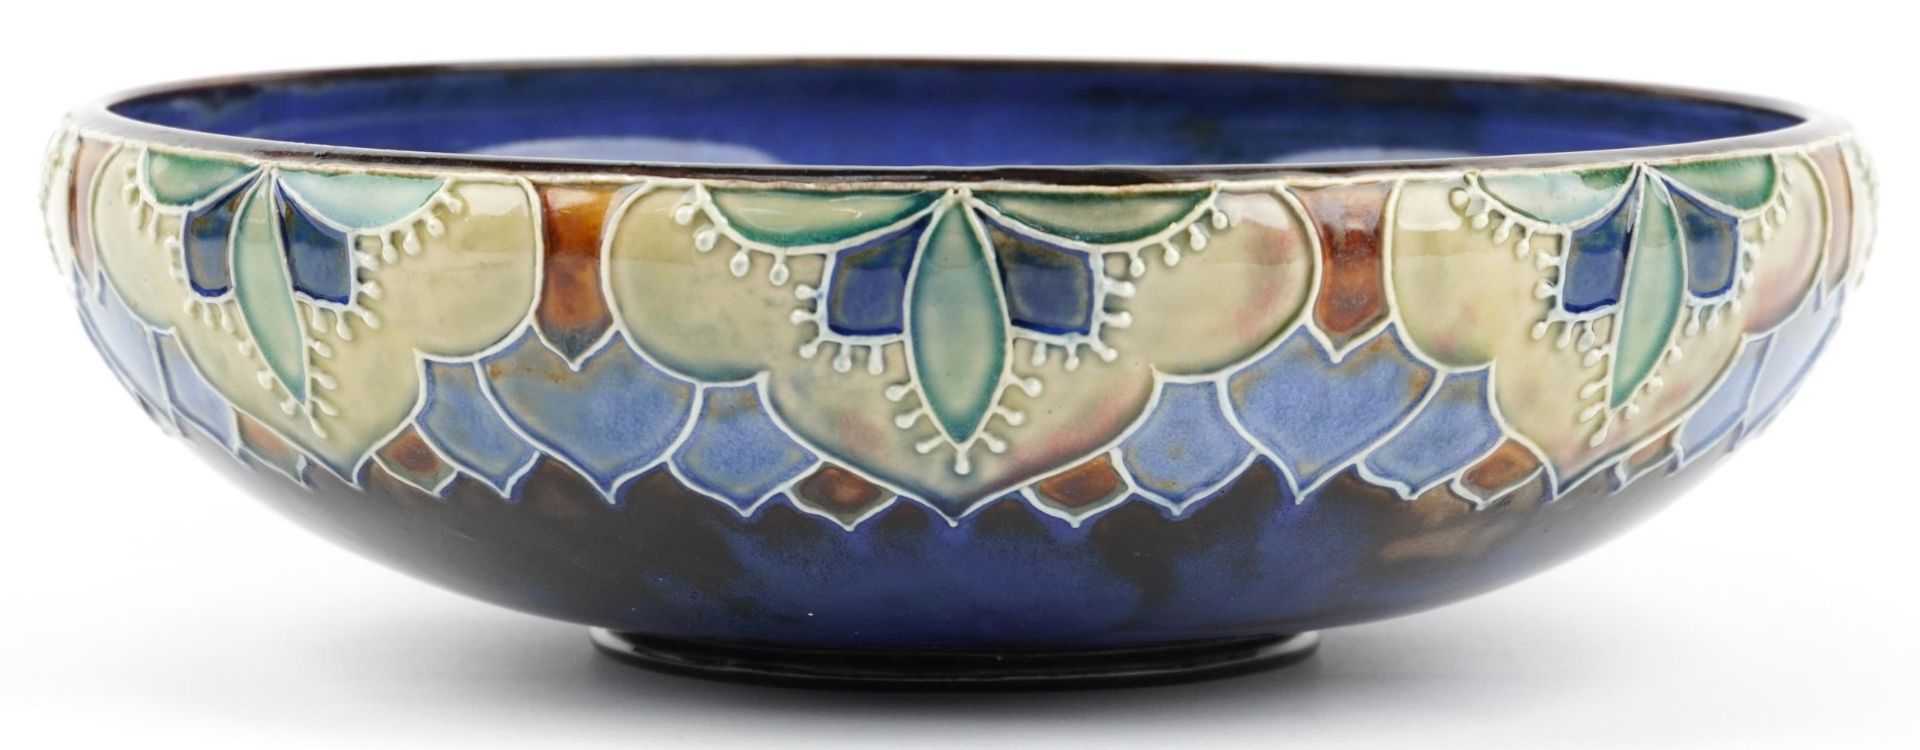 Royal Doulton, Art Nouveau stoneware bowl decorated in low relief with stylised flowers, impressed